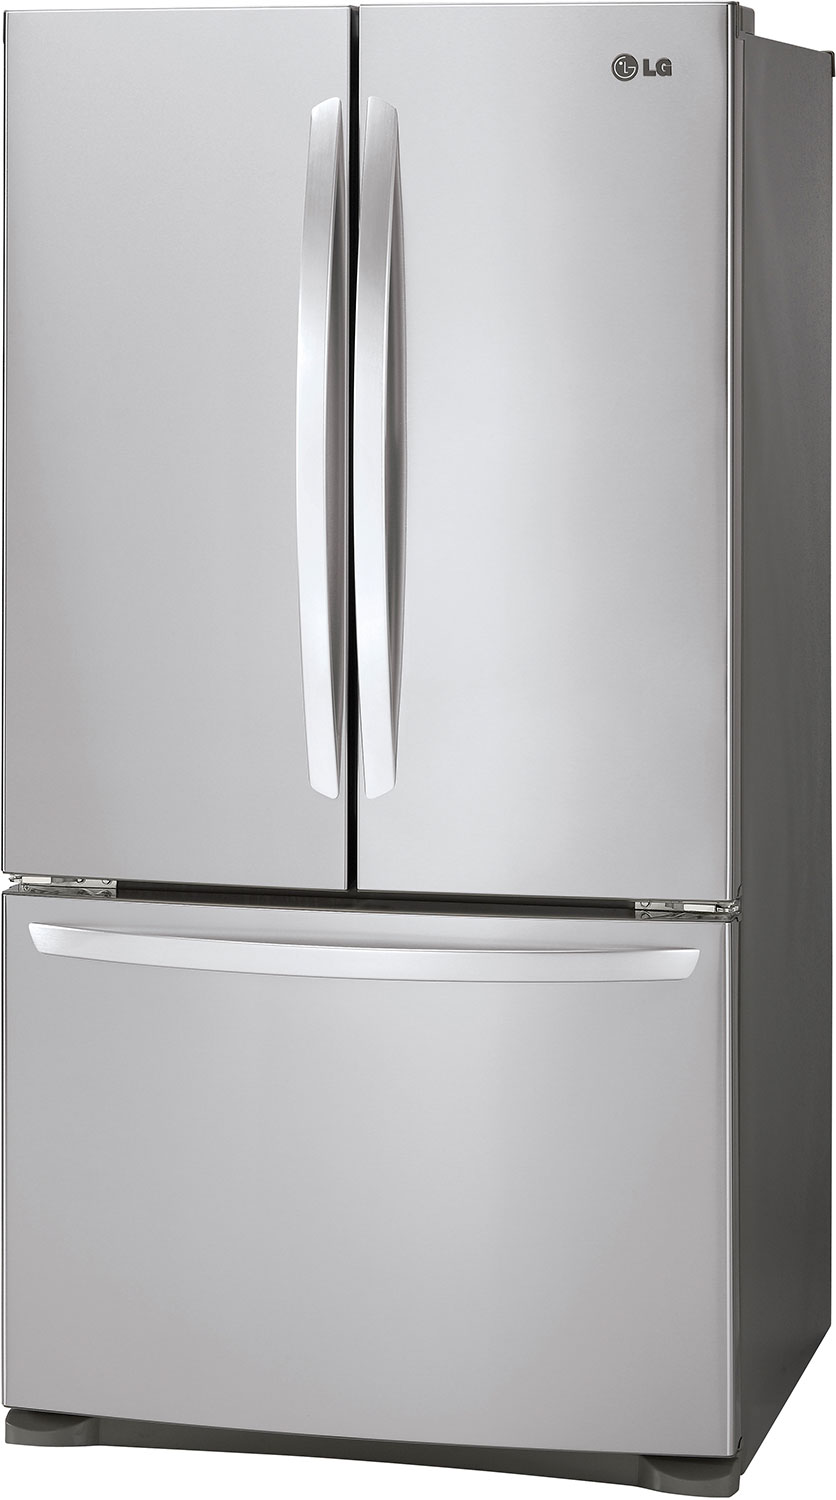 LG Stainless Steel CounterDepth French Door Refrigerator (20.7 Cu. Ft.) LFC21776ST Leon's